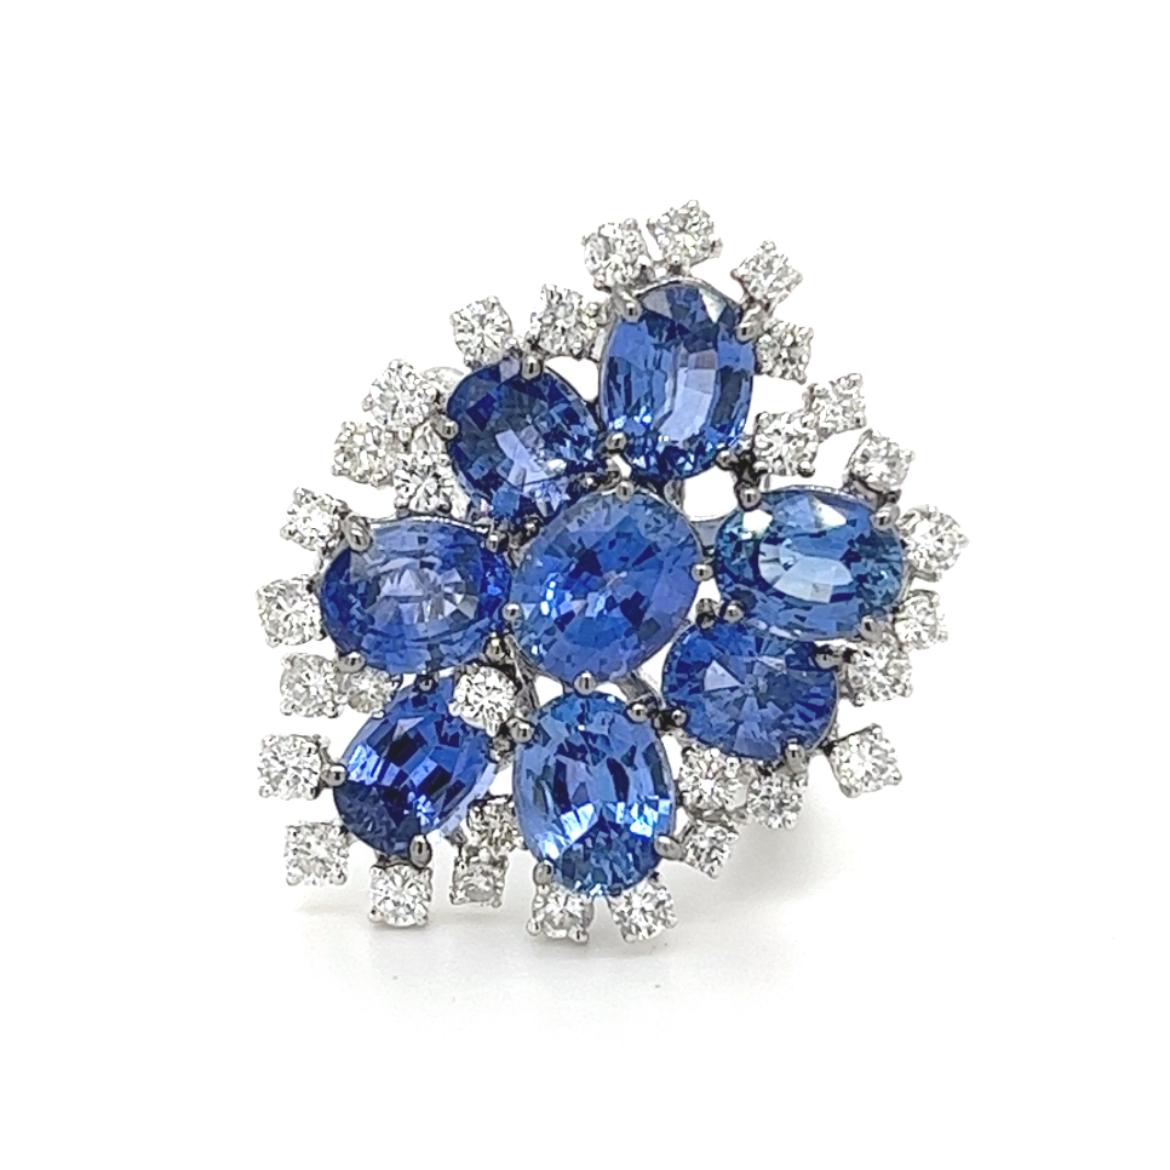 18K White Gold Royal Blue Sapphire Ring with Diamonds

8 Blue Sapphires - 9.33 CT
57 Diamonds - 1.65 CT
18K White Gold - 7.25 GM

The 18K white gold ring features a striking royal blue sapphire as its centrepiece, its deep, saturated hue captivating